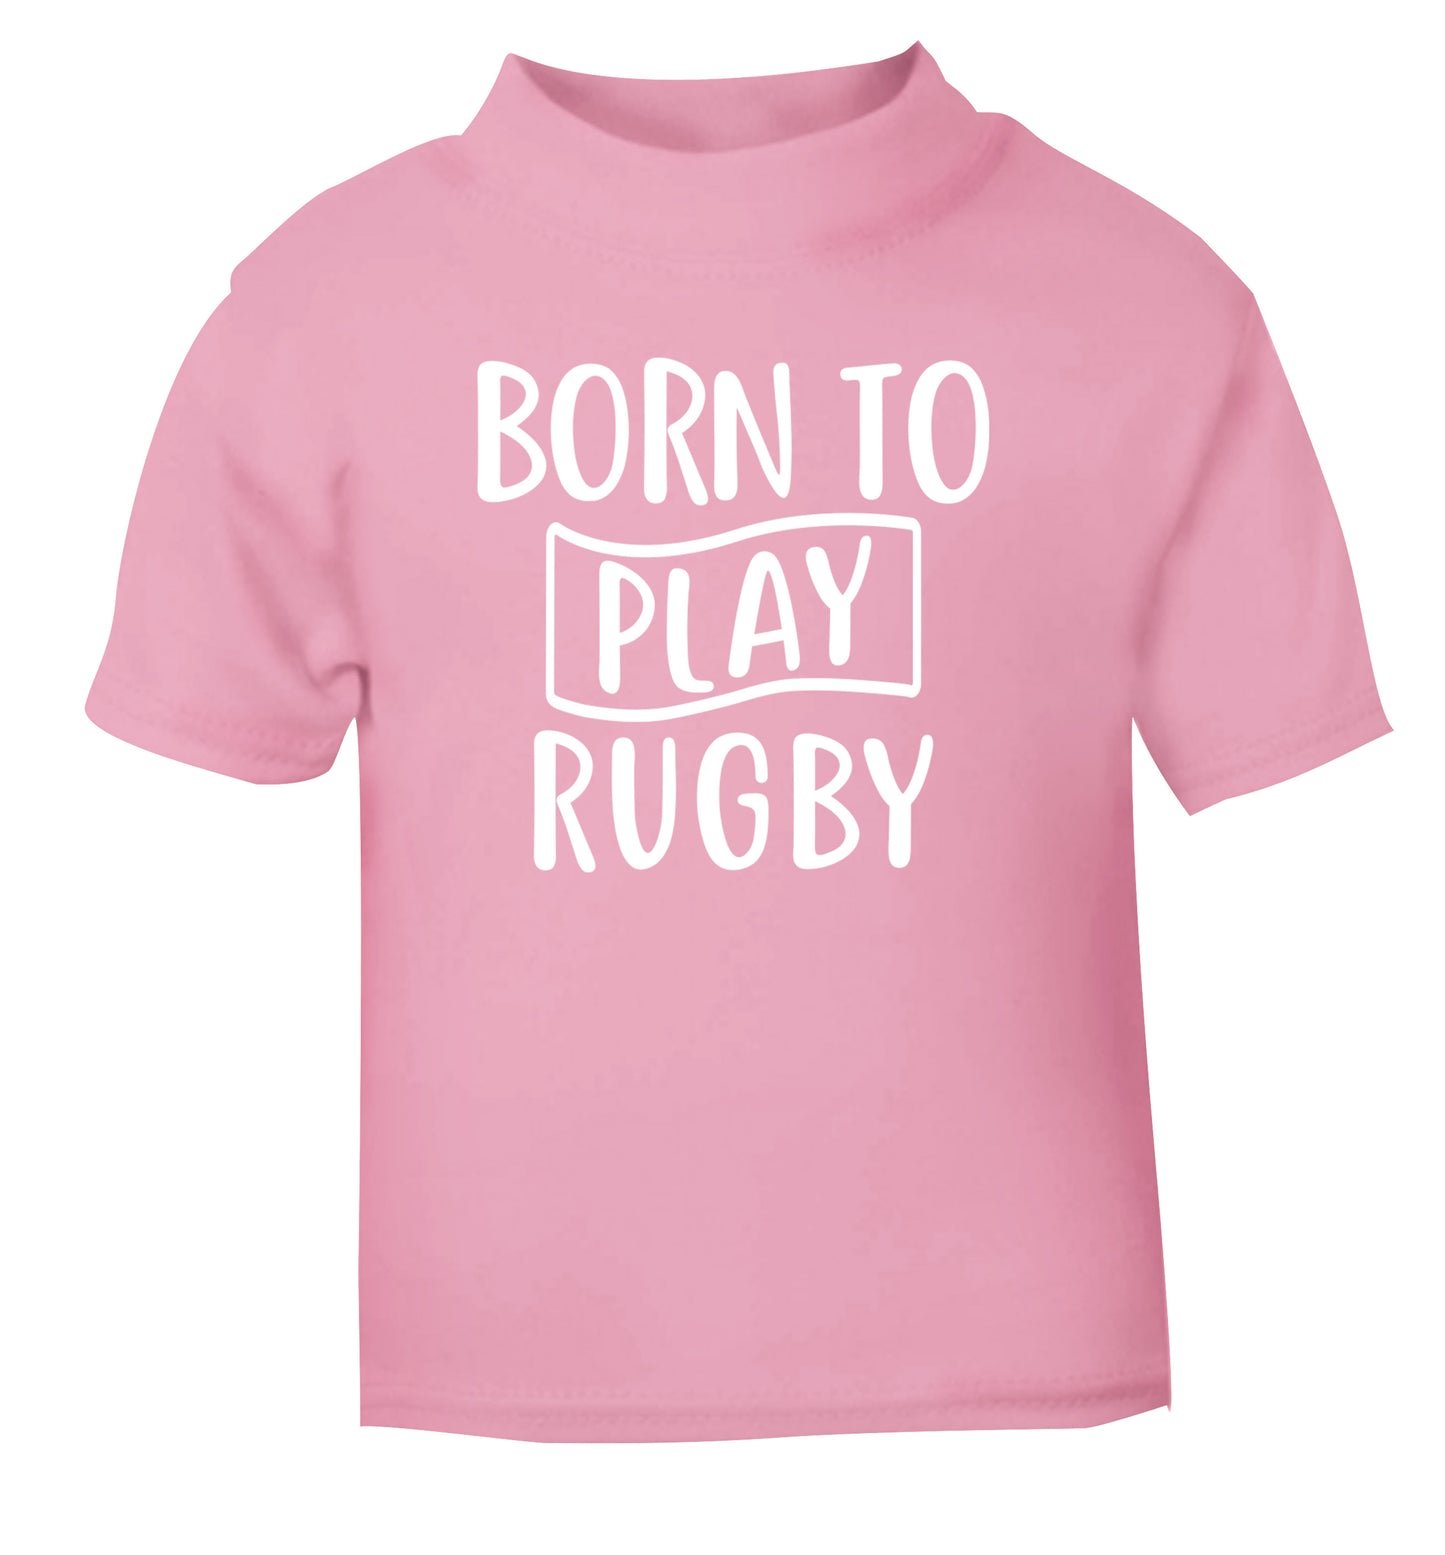 Born to play rugby light pink Baby Toddler Tshirt 2 Years